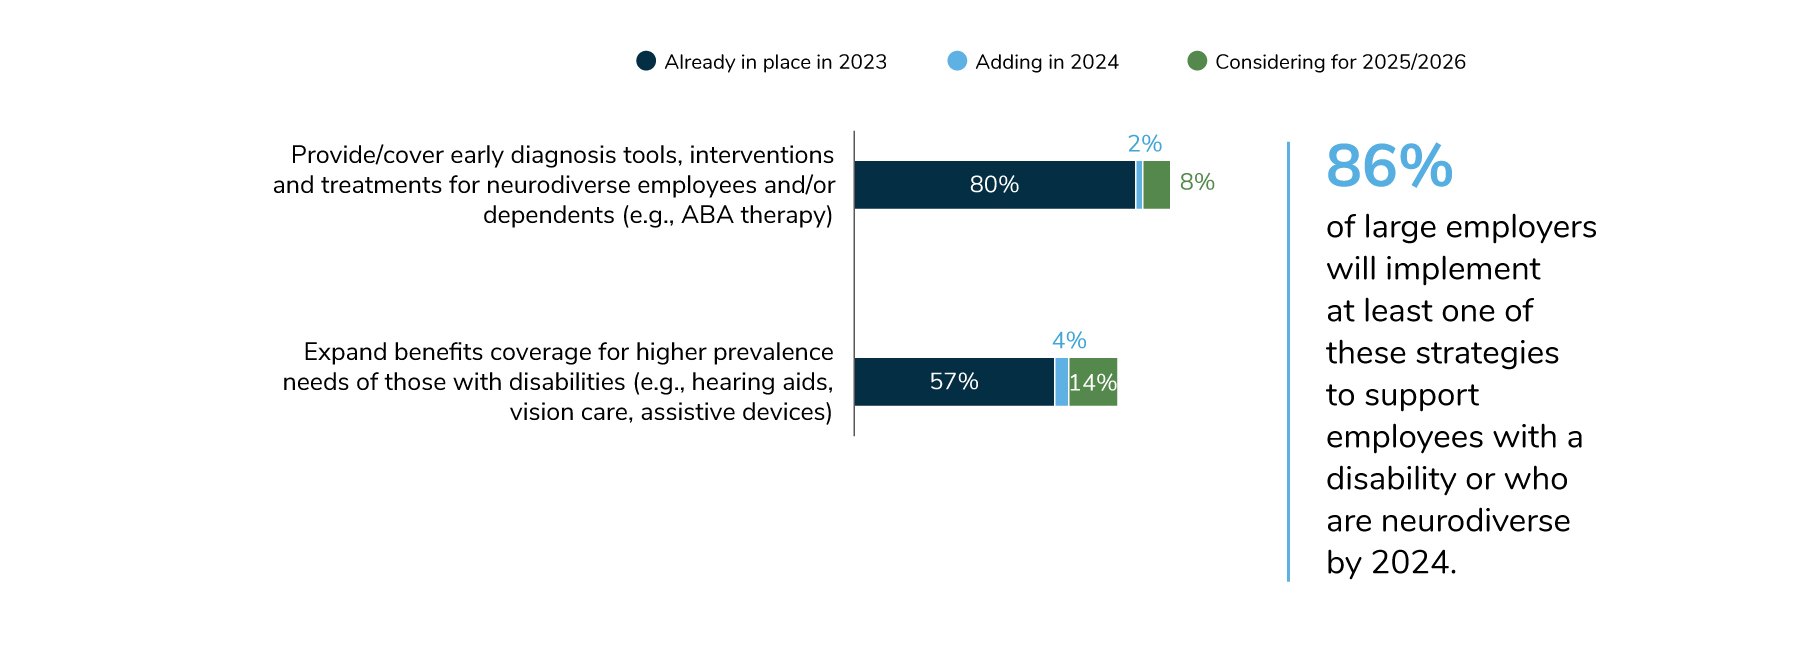 In 2024, 92% will provide/cover early diagnosis tools, interventions and treatments for neurodiverse employees and/or dependents. 61% will have expanded benefits coverage for higher prevalence needs of those with disabilities.